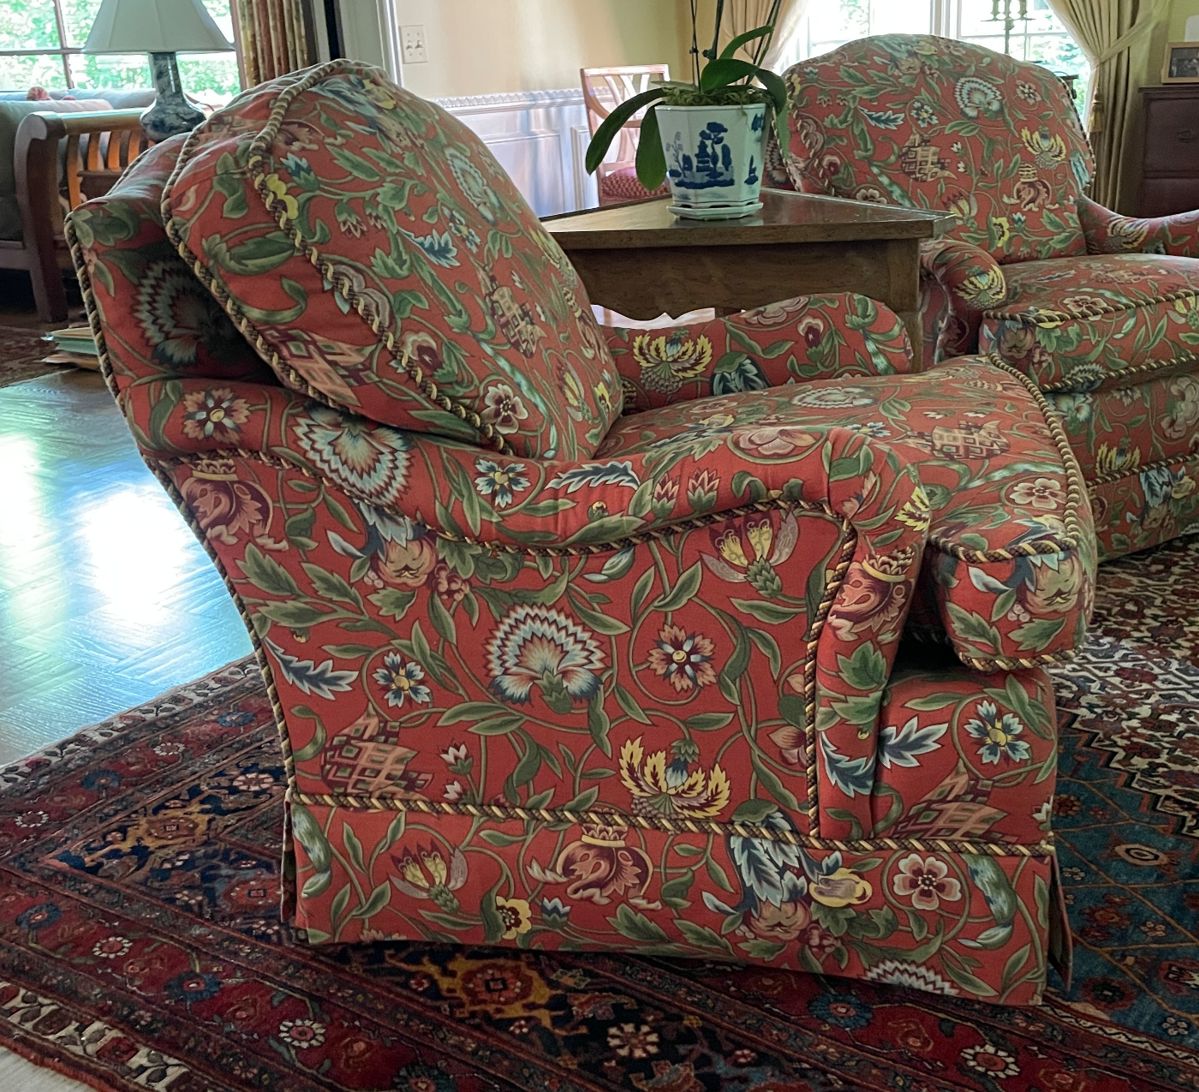 Pair of Baker Furniture Club Chairs Upholstered In A Clarence House Fabric With Contrasting Piping. Each Chair Measures 32" W x 36" D. Photo 3 of 4. 